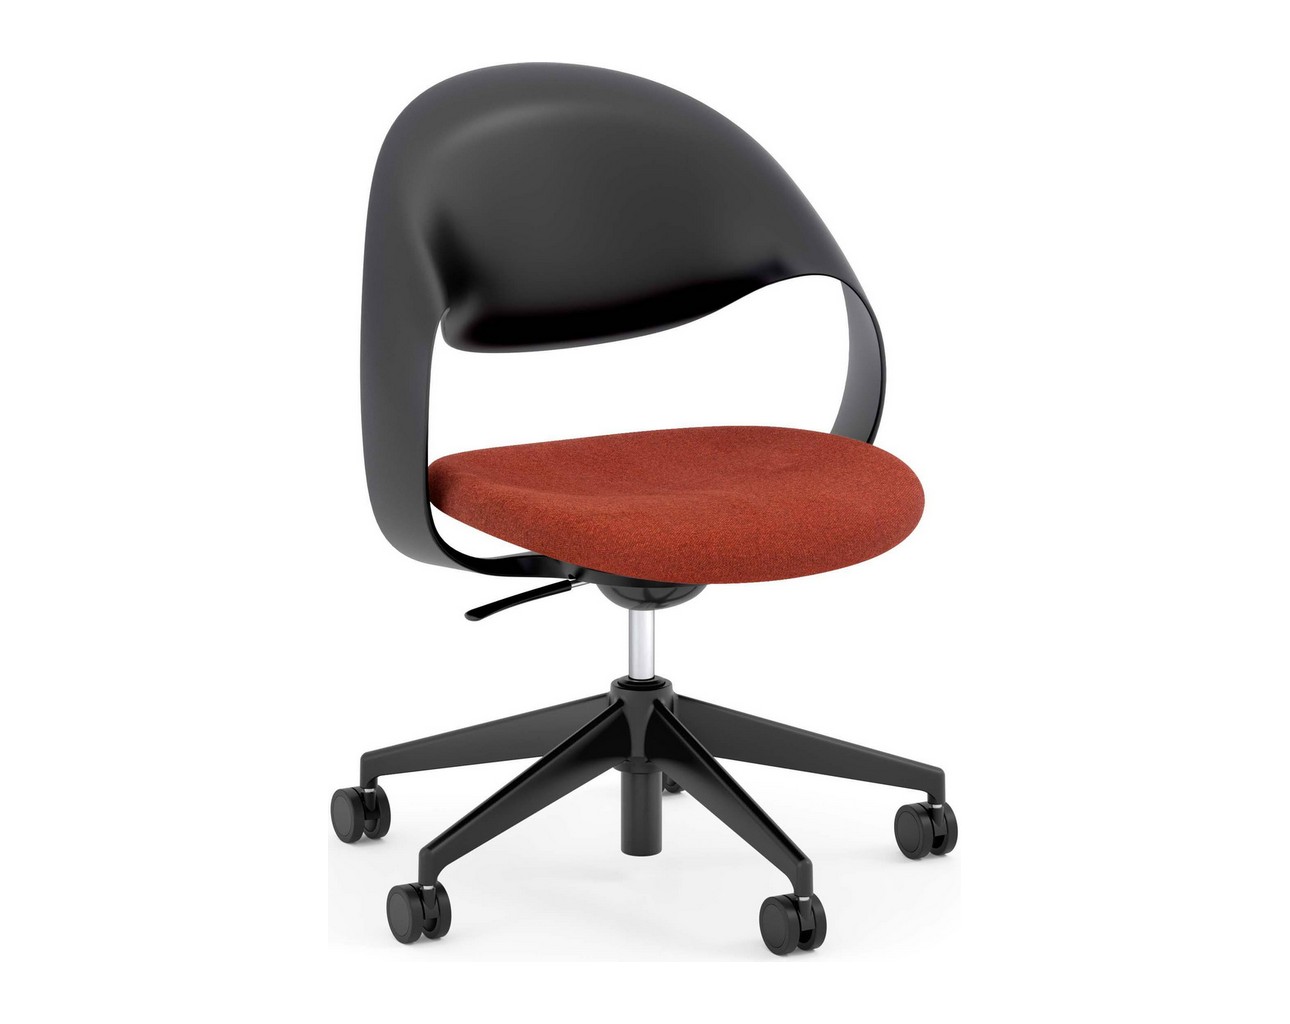 Loop Multi-Purpose Chair – Black Frame with Red Seat